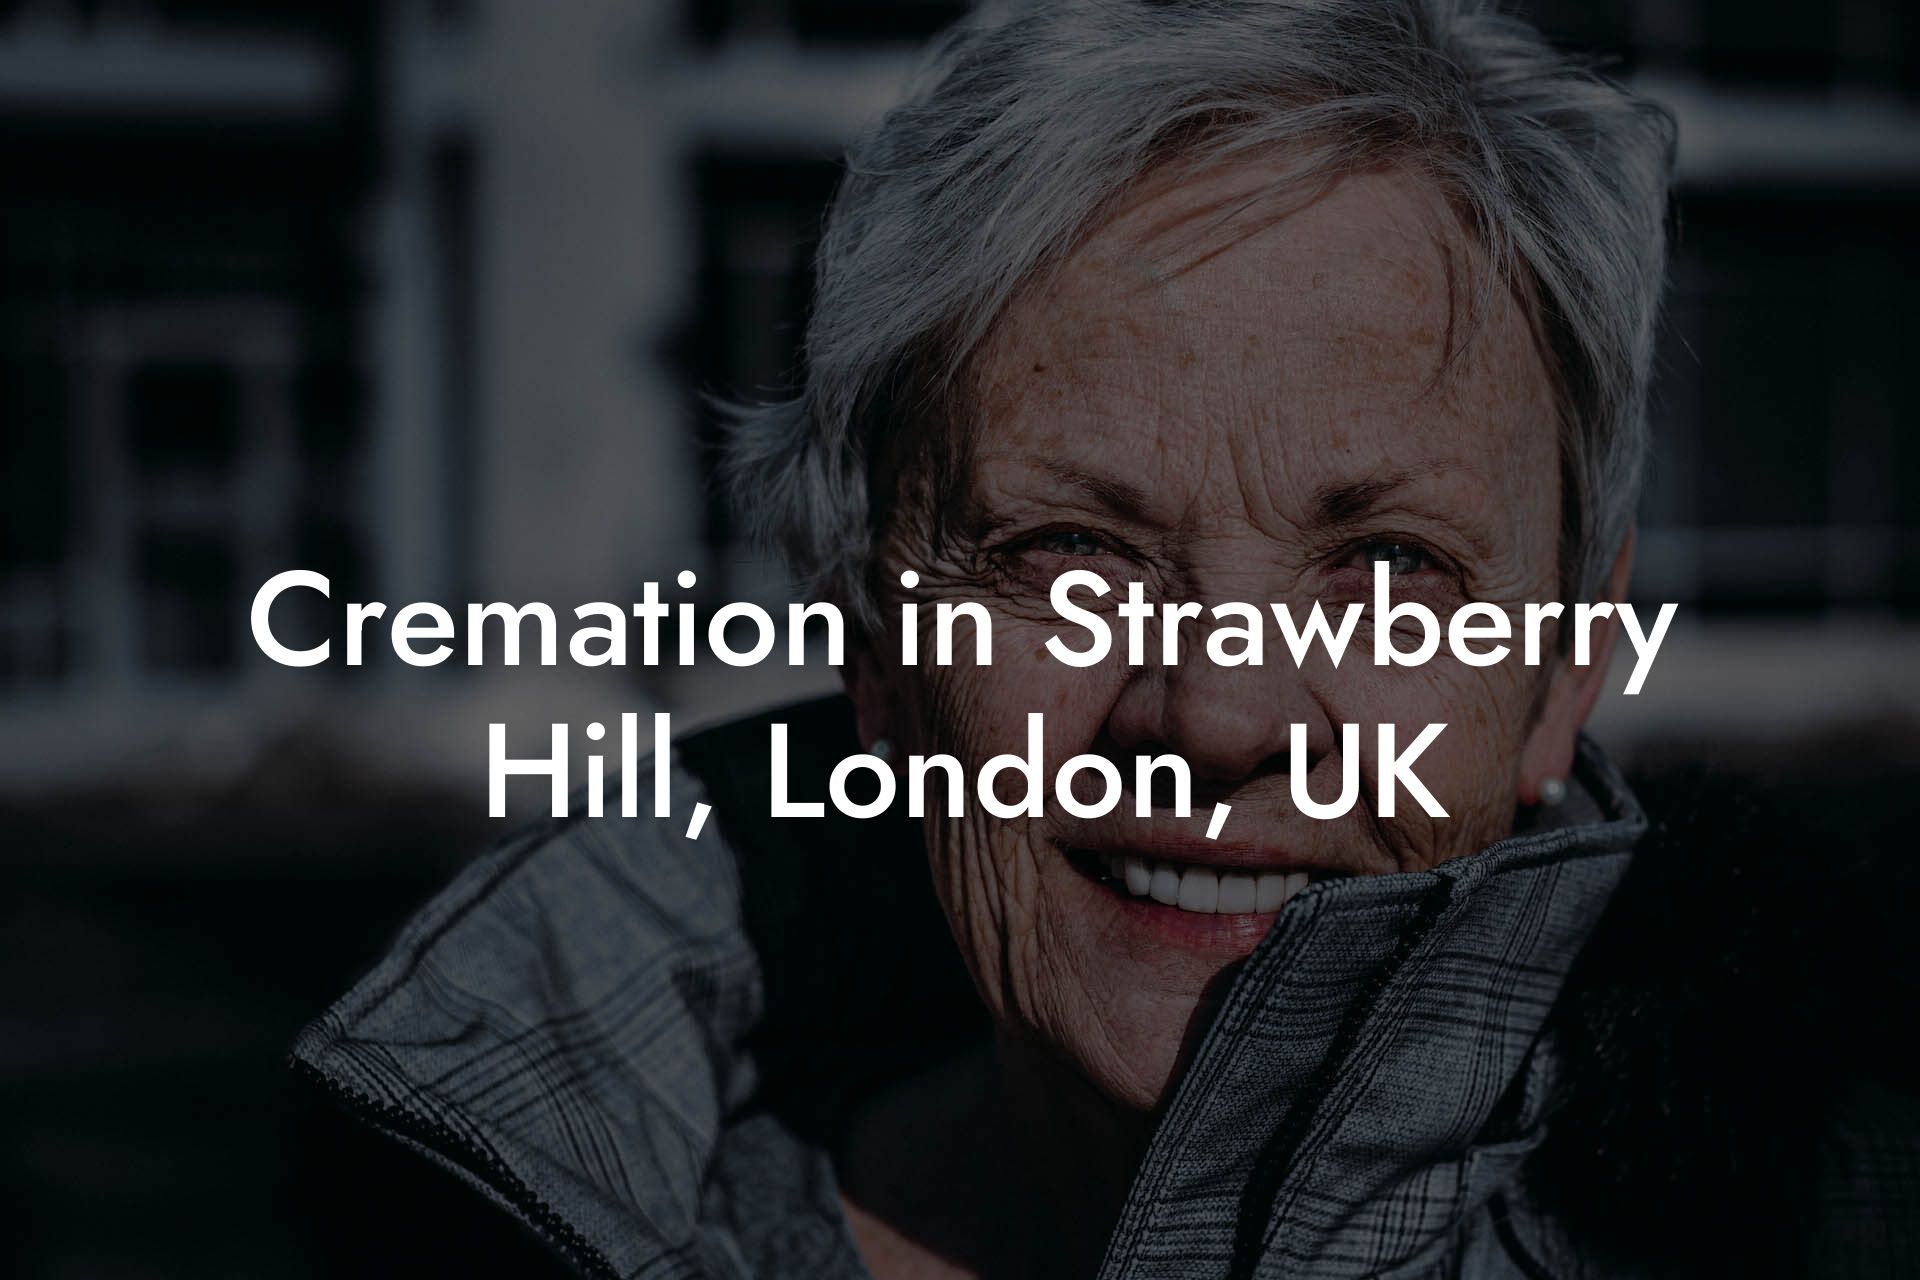 Cremation in Strawberry Hill, London, UK